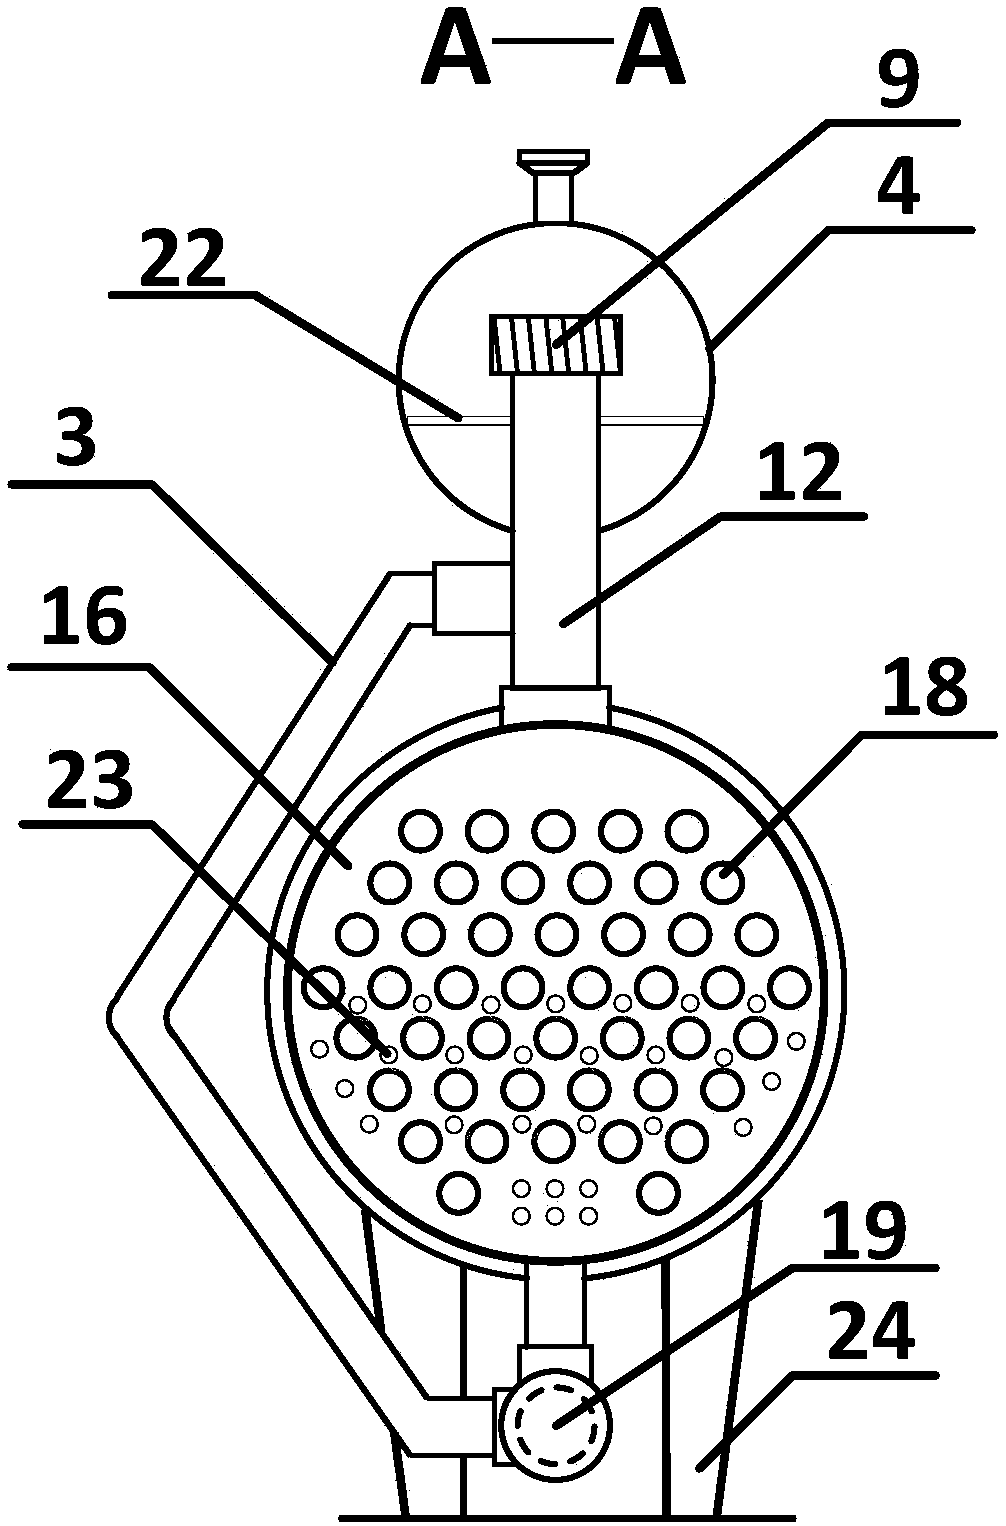 A Natural Circulation Split Tube Shell Waste Heat Boiler with Optimized Flow Field Arrangement